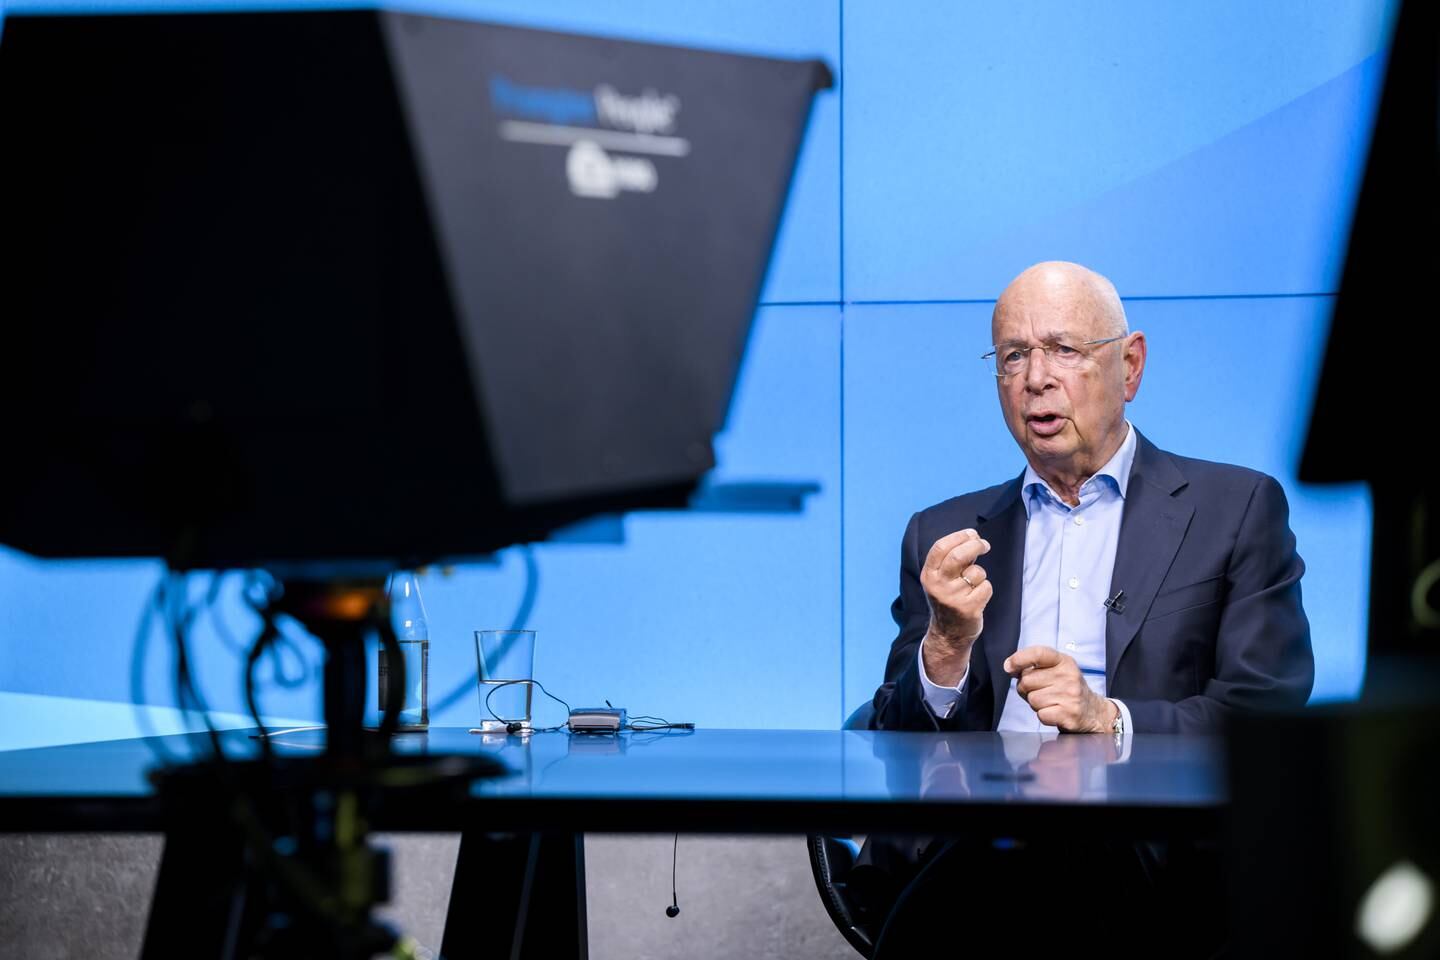 Klaus Schwab, founder and executive chairman of the World Economic Forum, delivers a speech during a virtual media briefing near Geneva. EPA